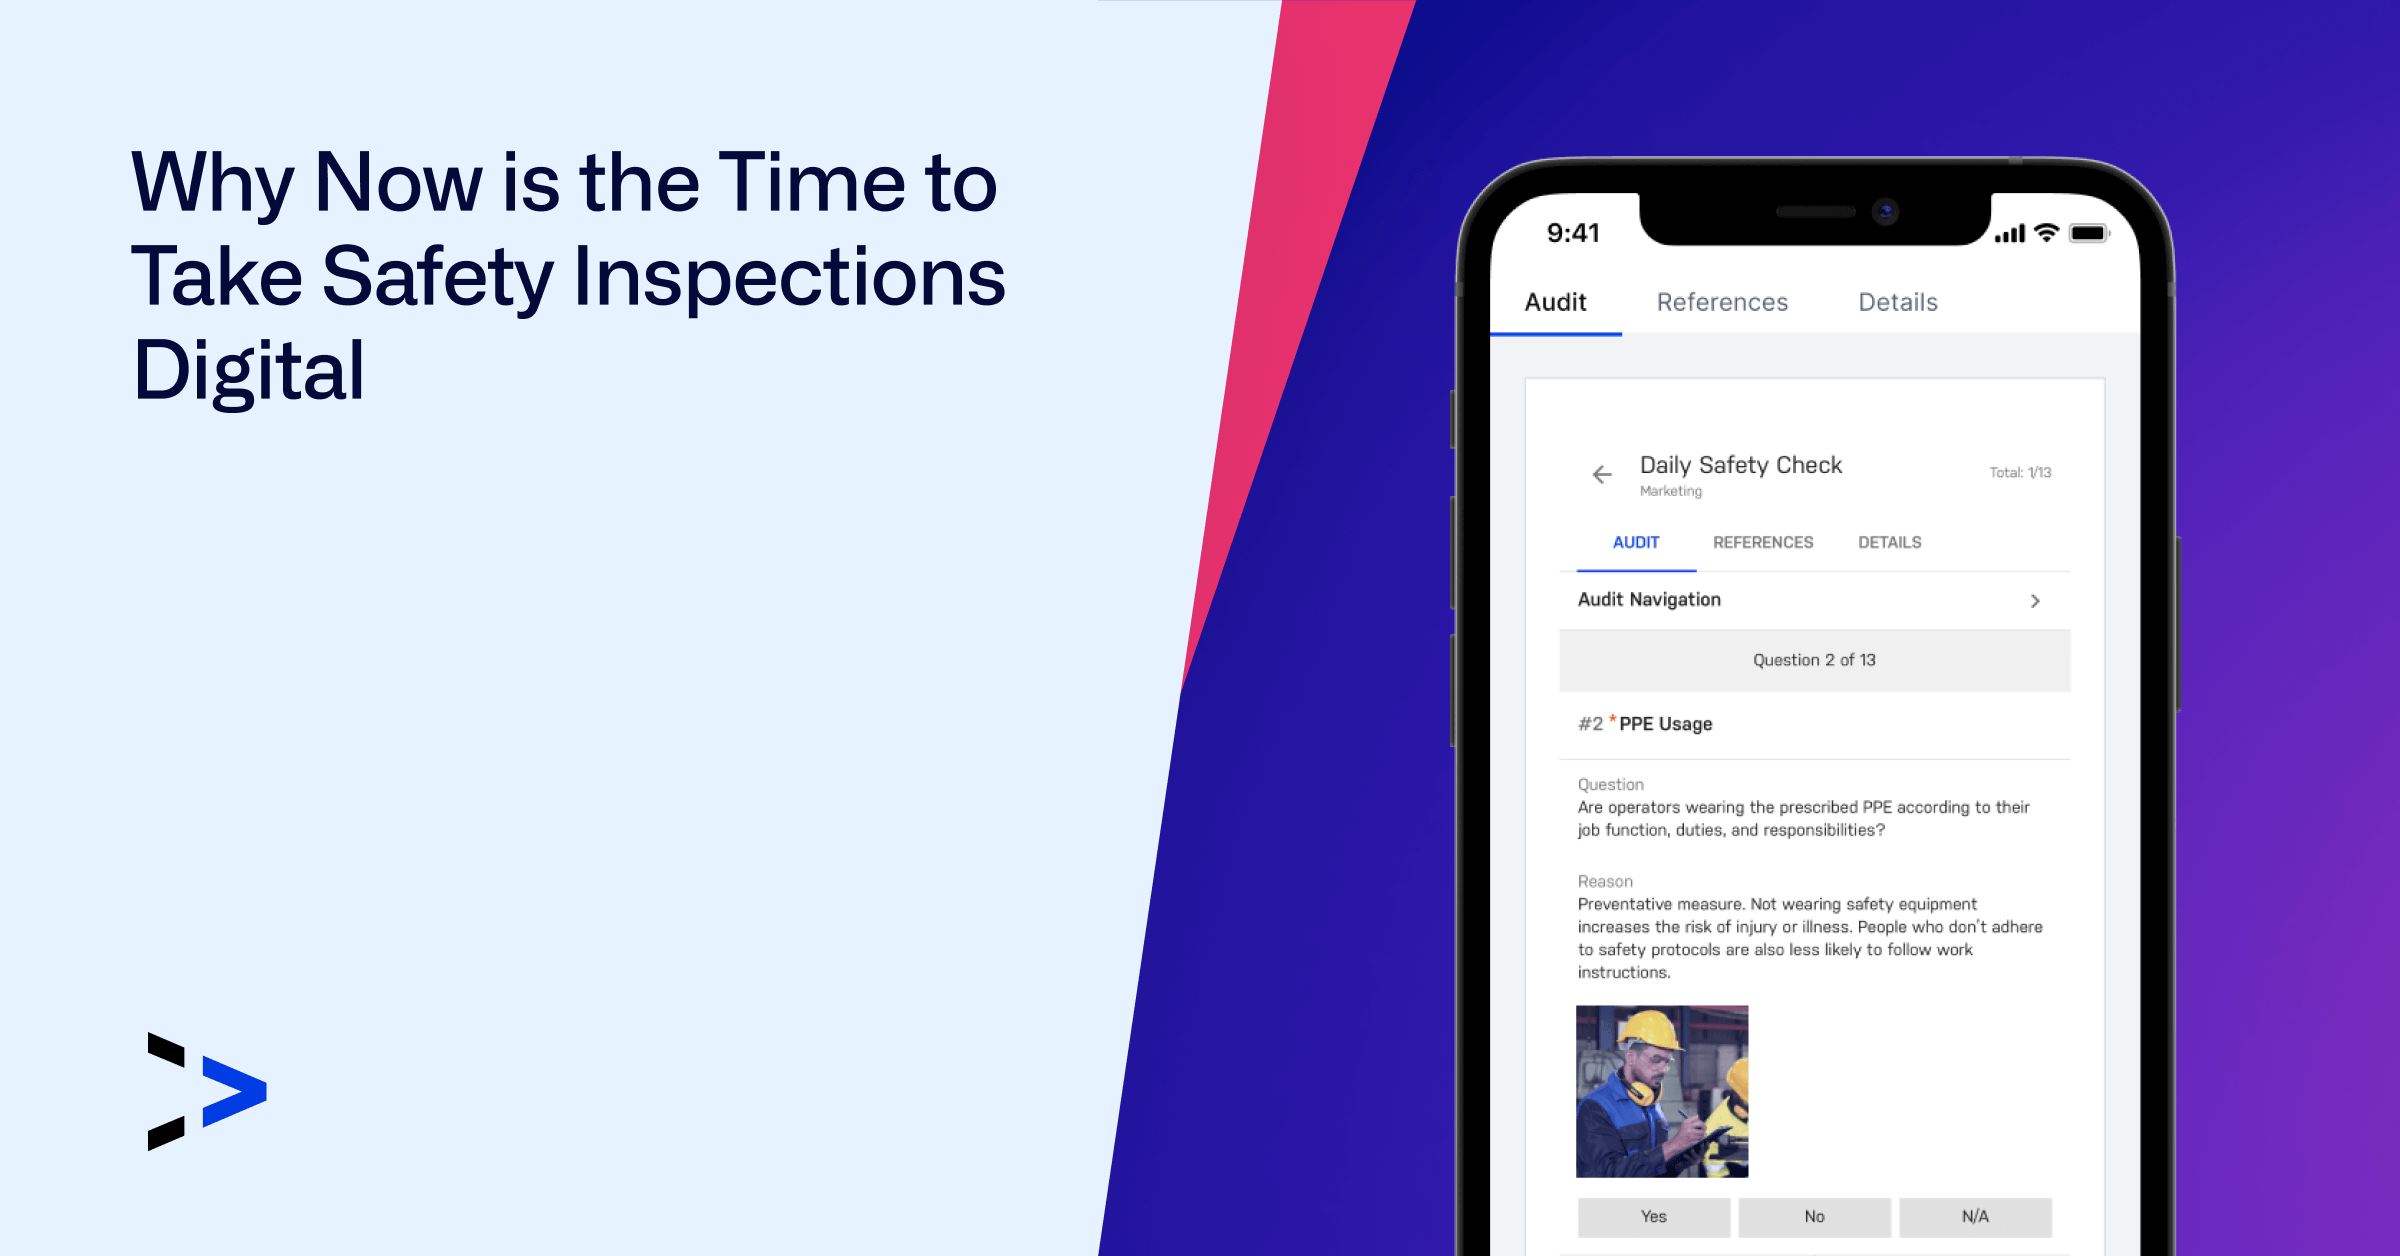 Digital Safety Inspections